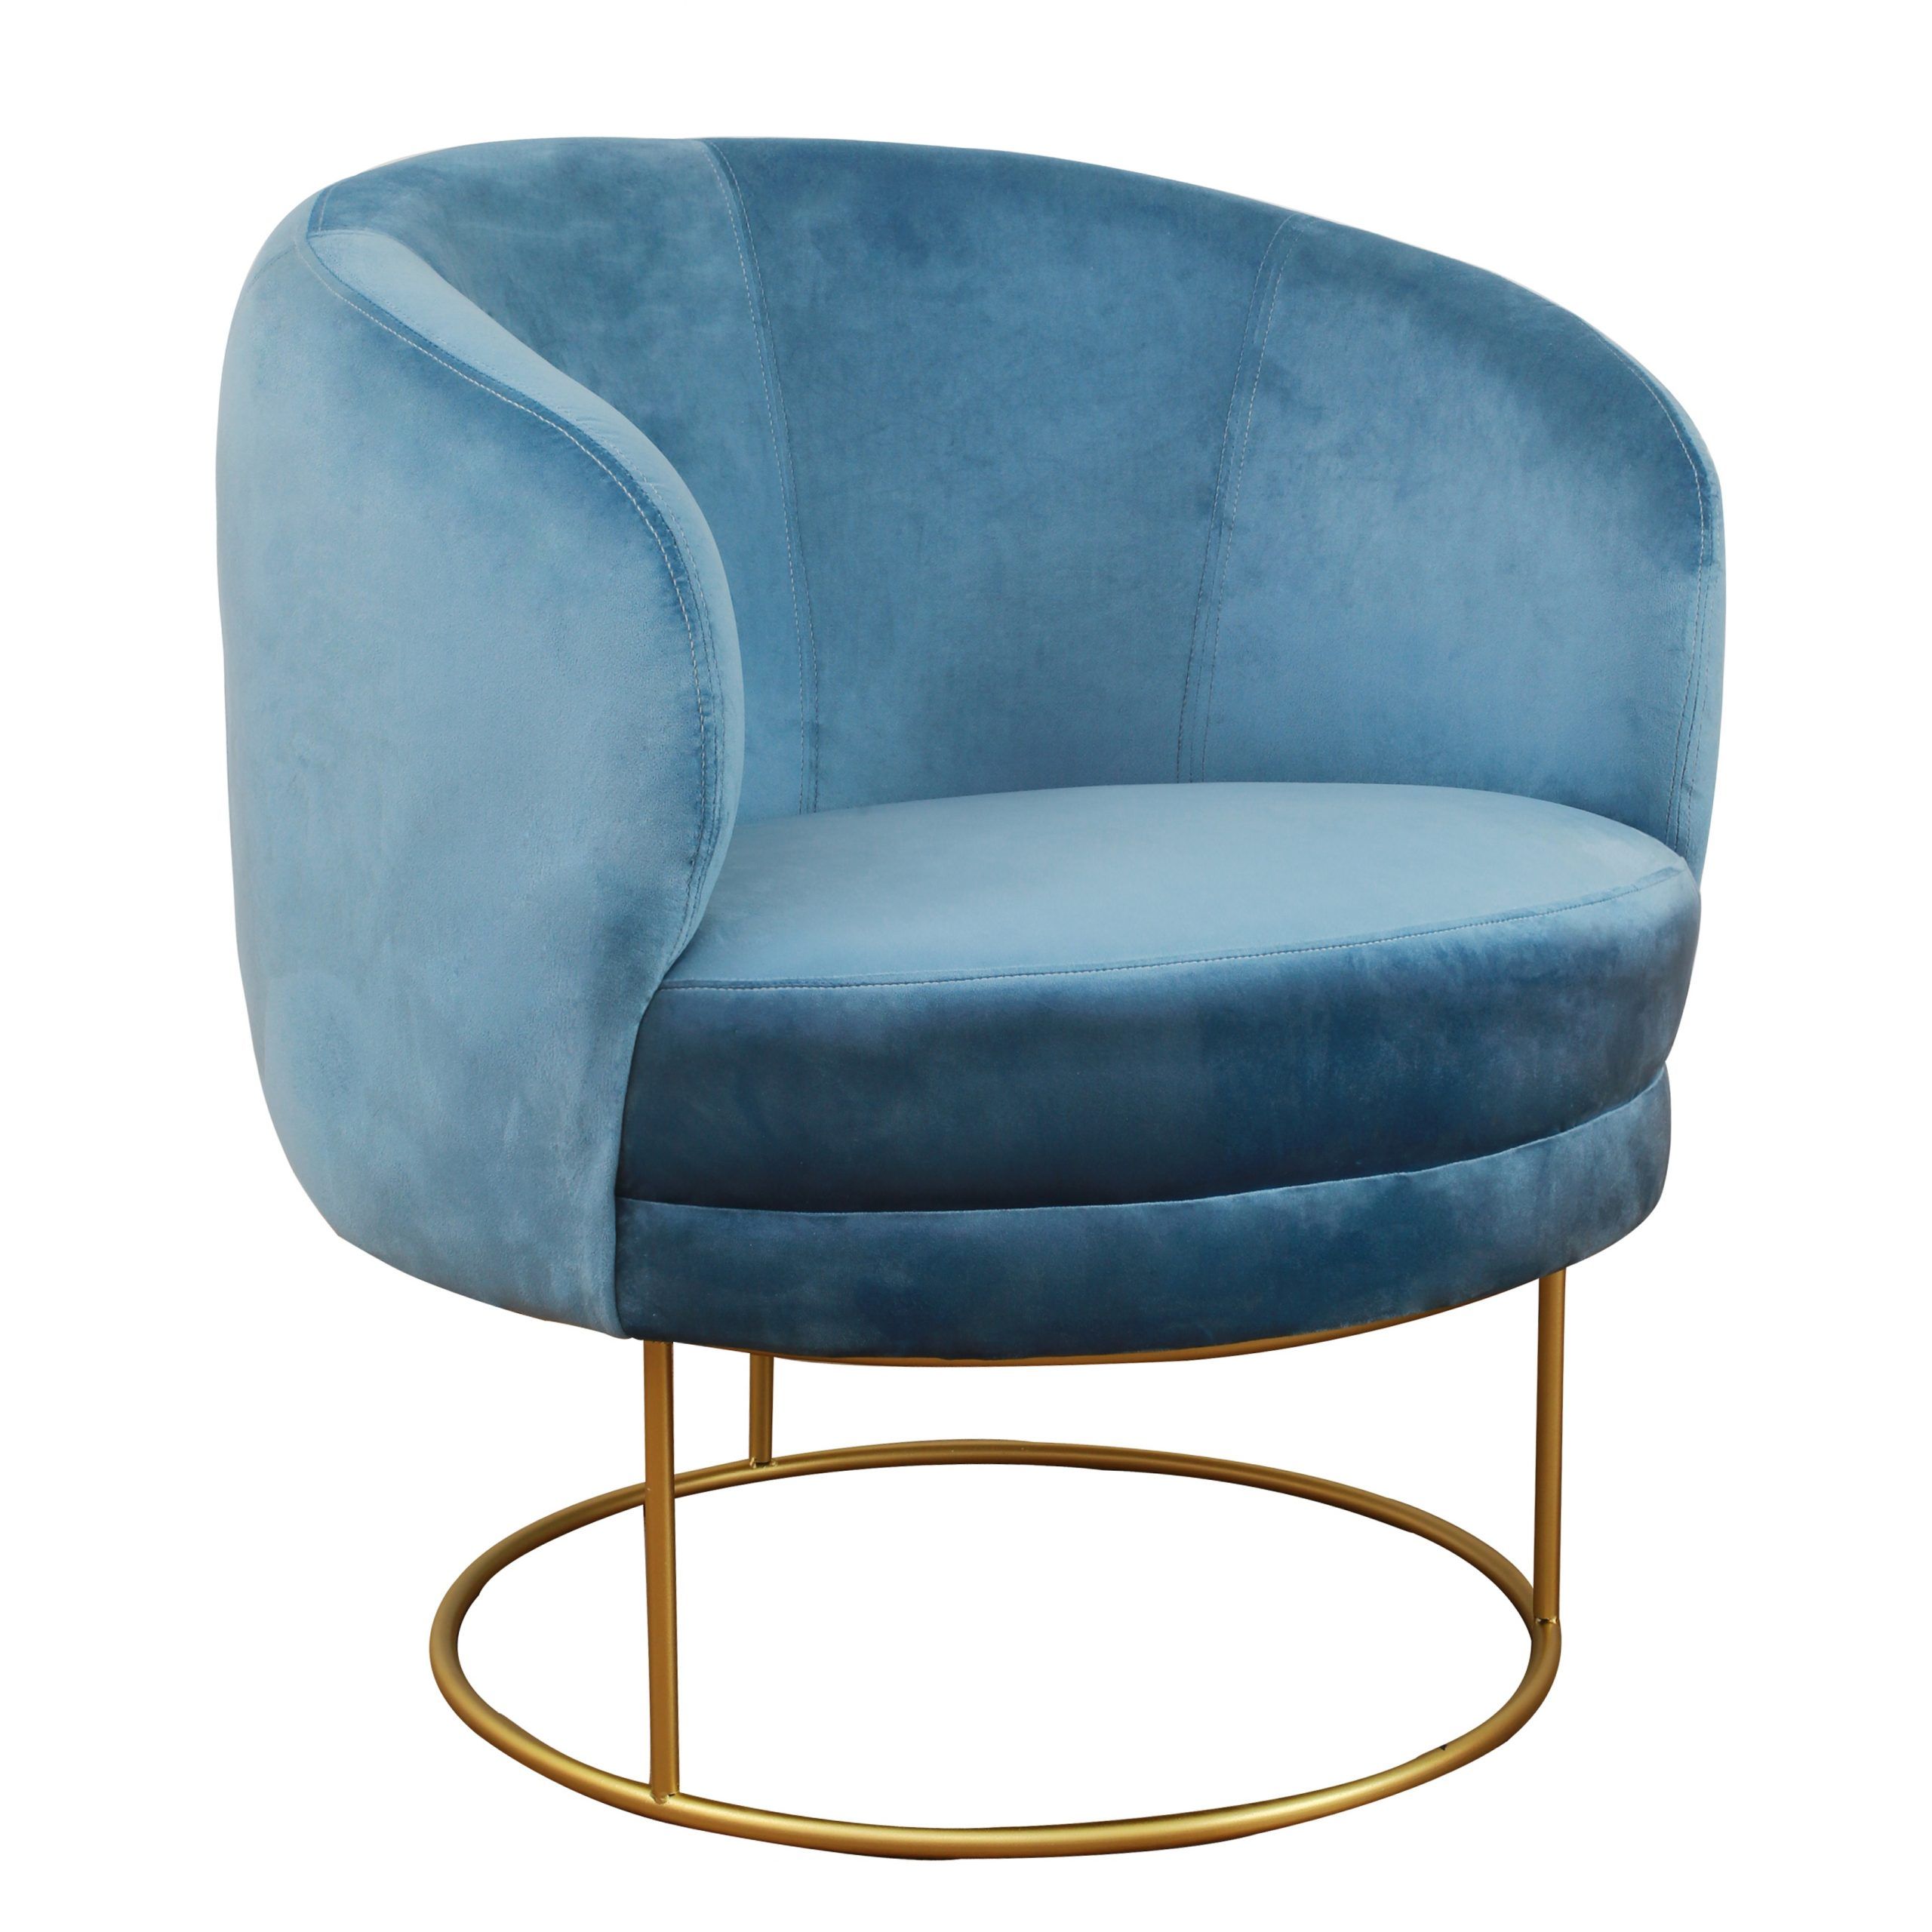 Most Recent Bella Blue Velvet Chair – Tov Furniture Regarding Royal Blue Round Accent Stools With Fringe Trim (View 1 of 10)